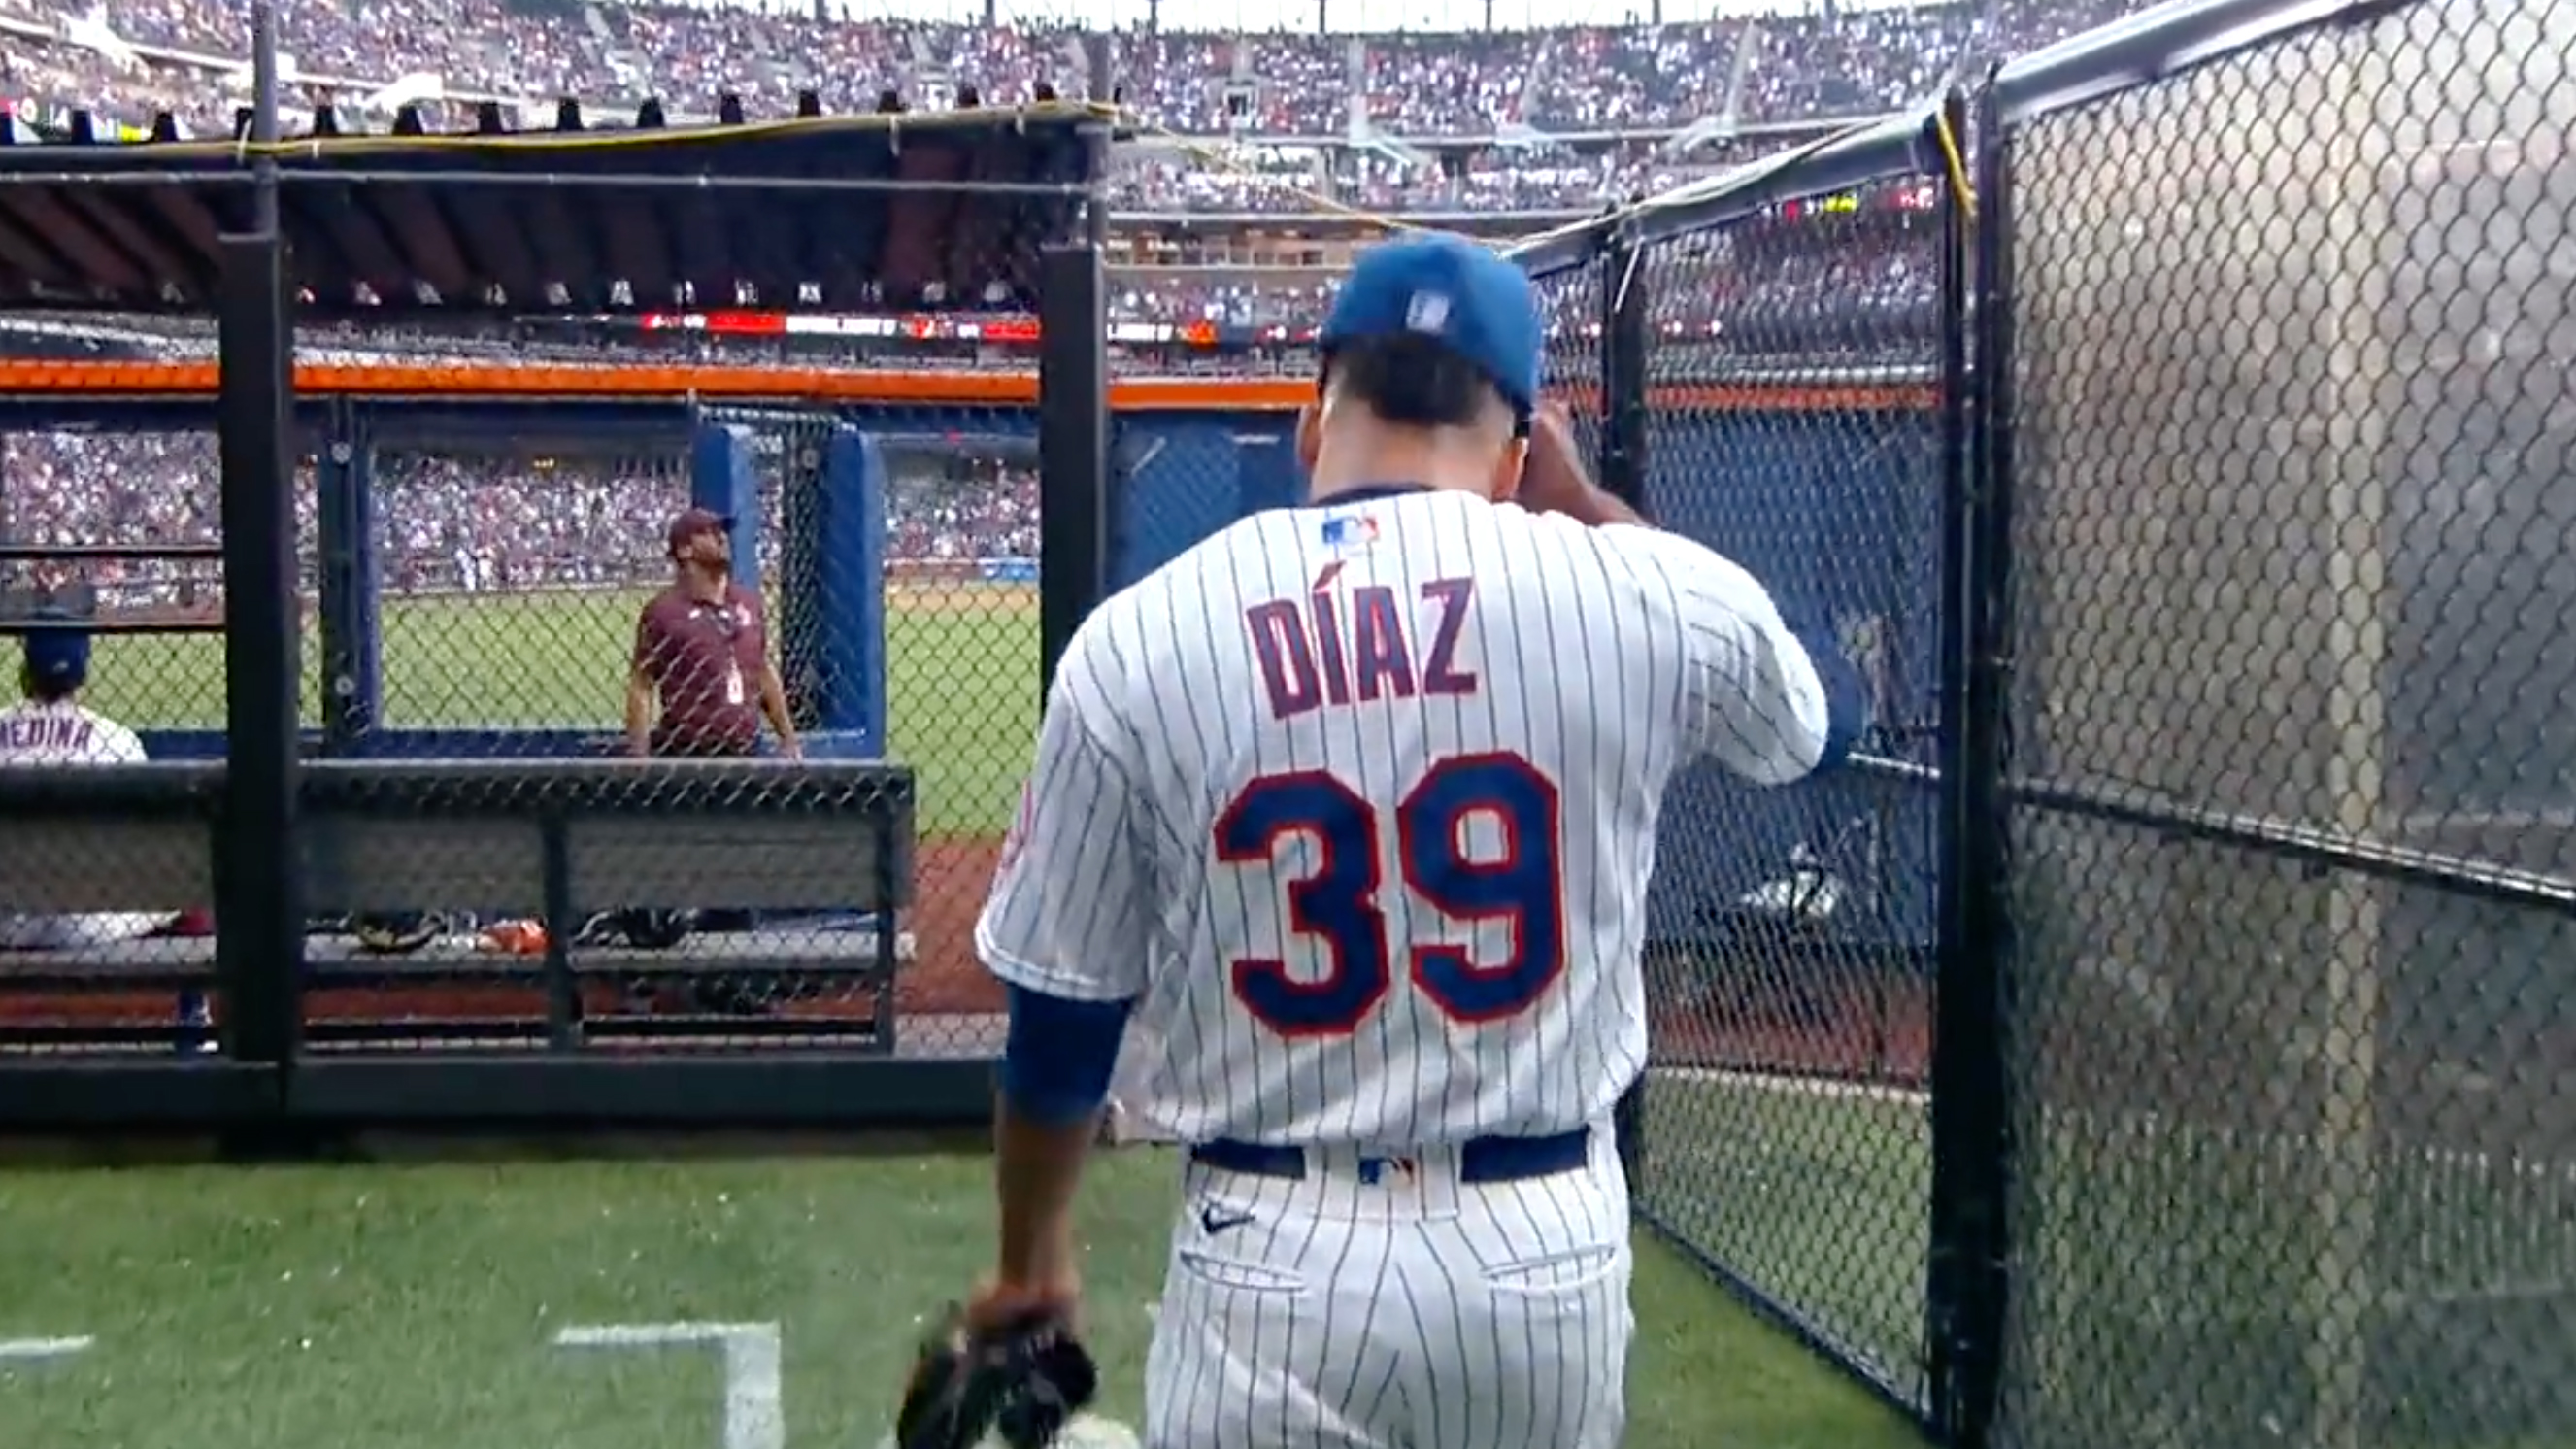 The Most Electric Thing in Sports Right Now Is Mets Closer Edwin Diaz Entering a Game